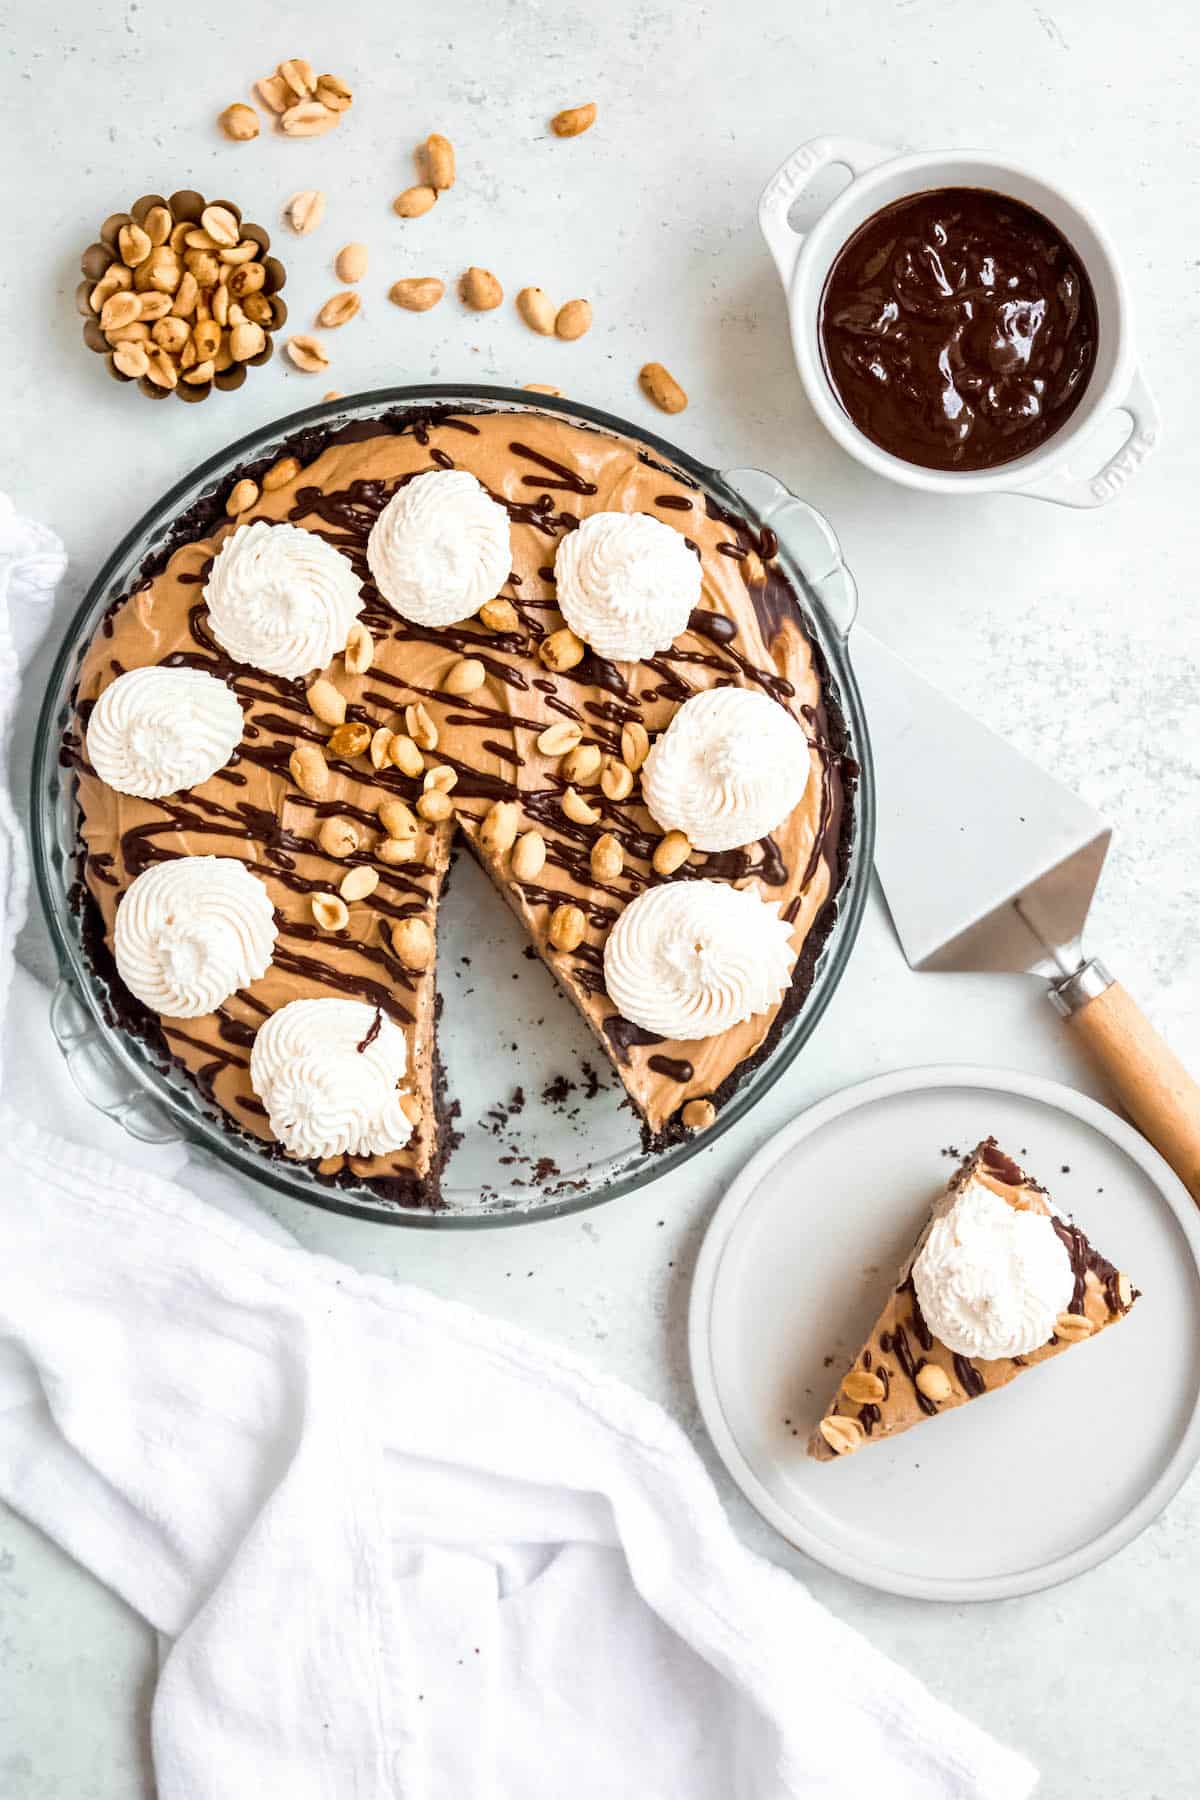 flat lay shot of chocolate peanut butter pie with a slice removed to a white dessert plate plus a bowl of chocolate peanut butter ganache and a ramekin of roasted peanuts on a white table.